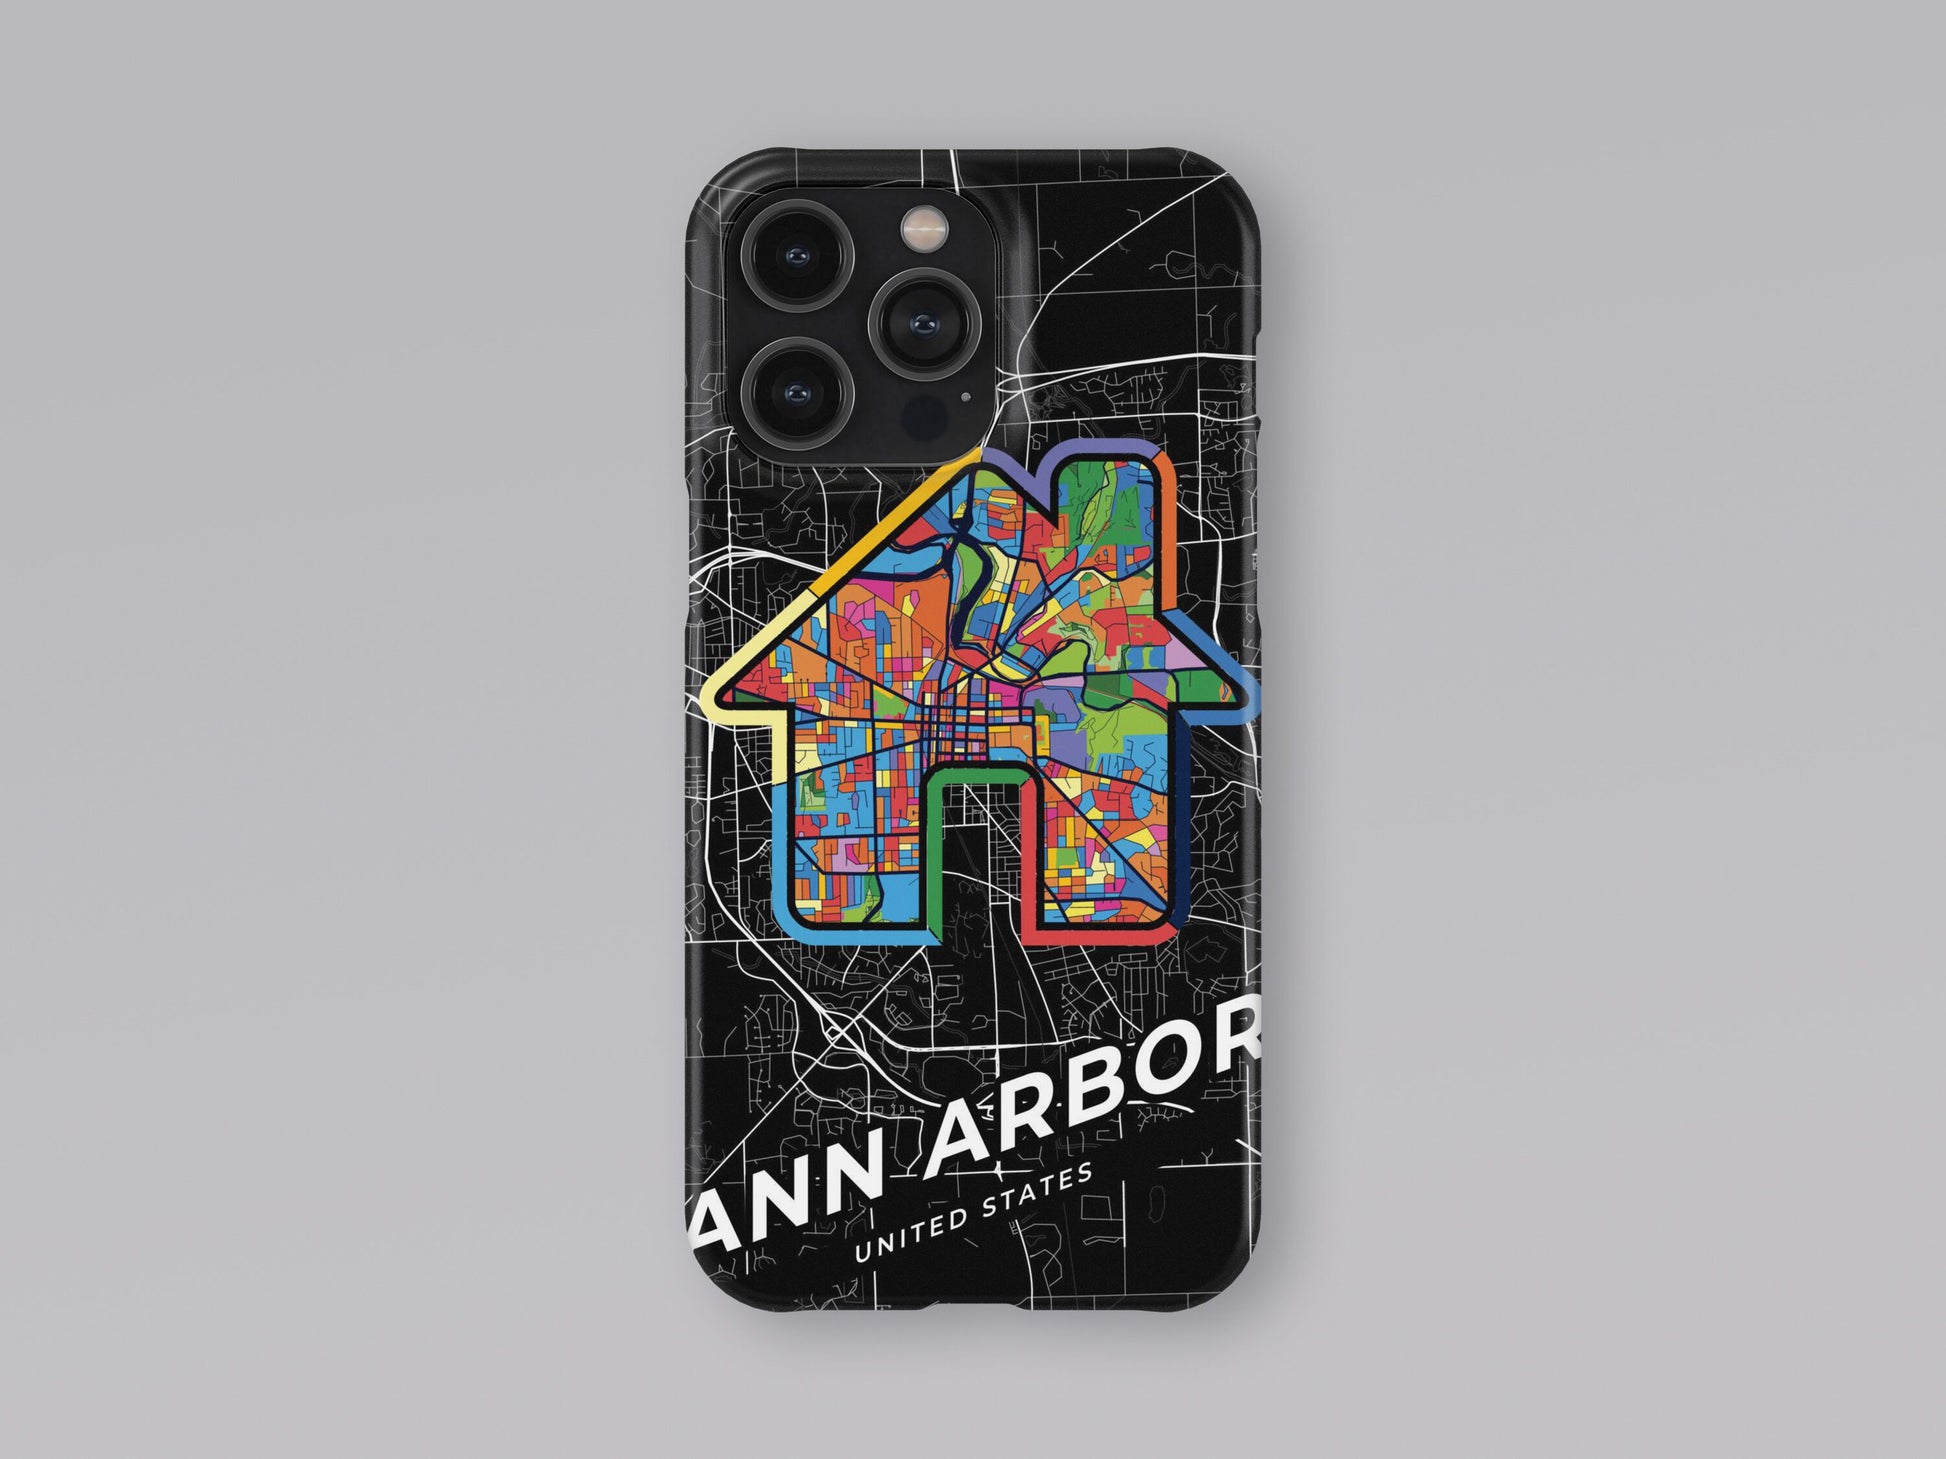 Ann Arbor Michigan slim phone case with colorful icon. Birthday, wedding or housewarming gift. Couple match cases. 3